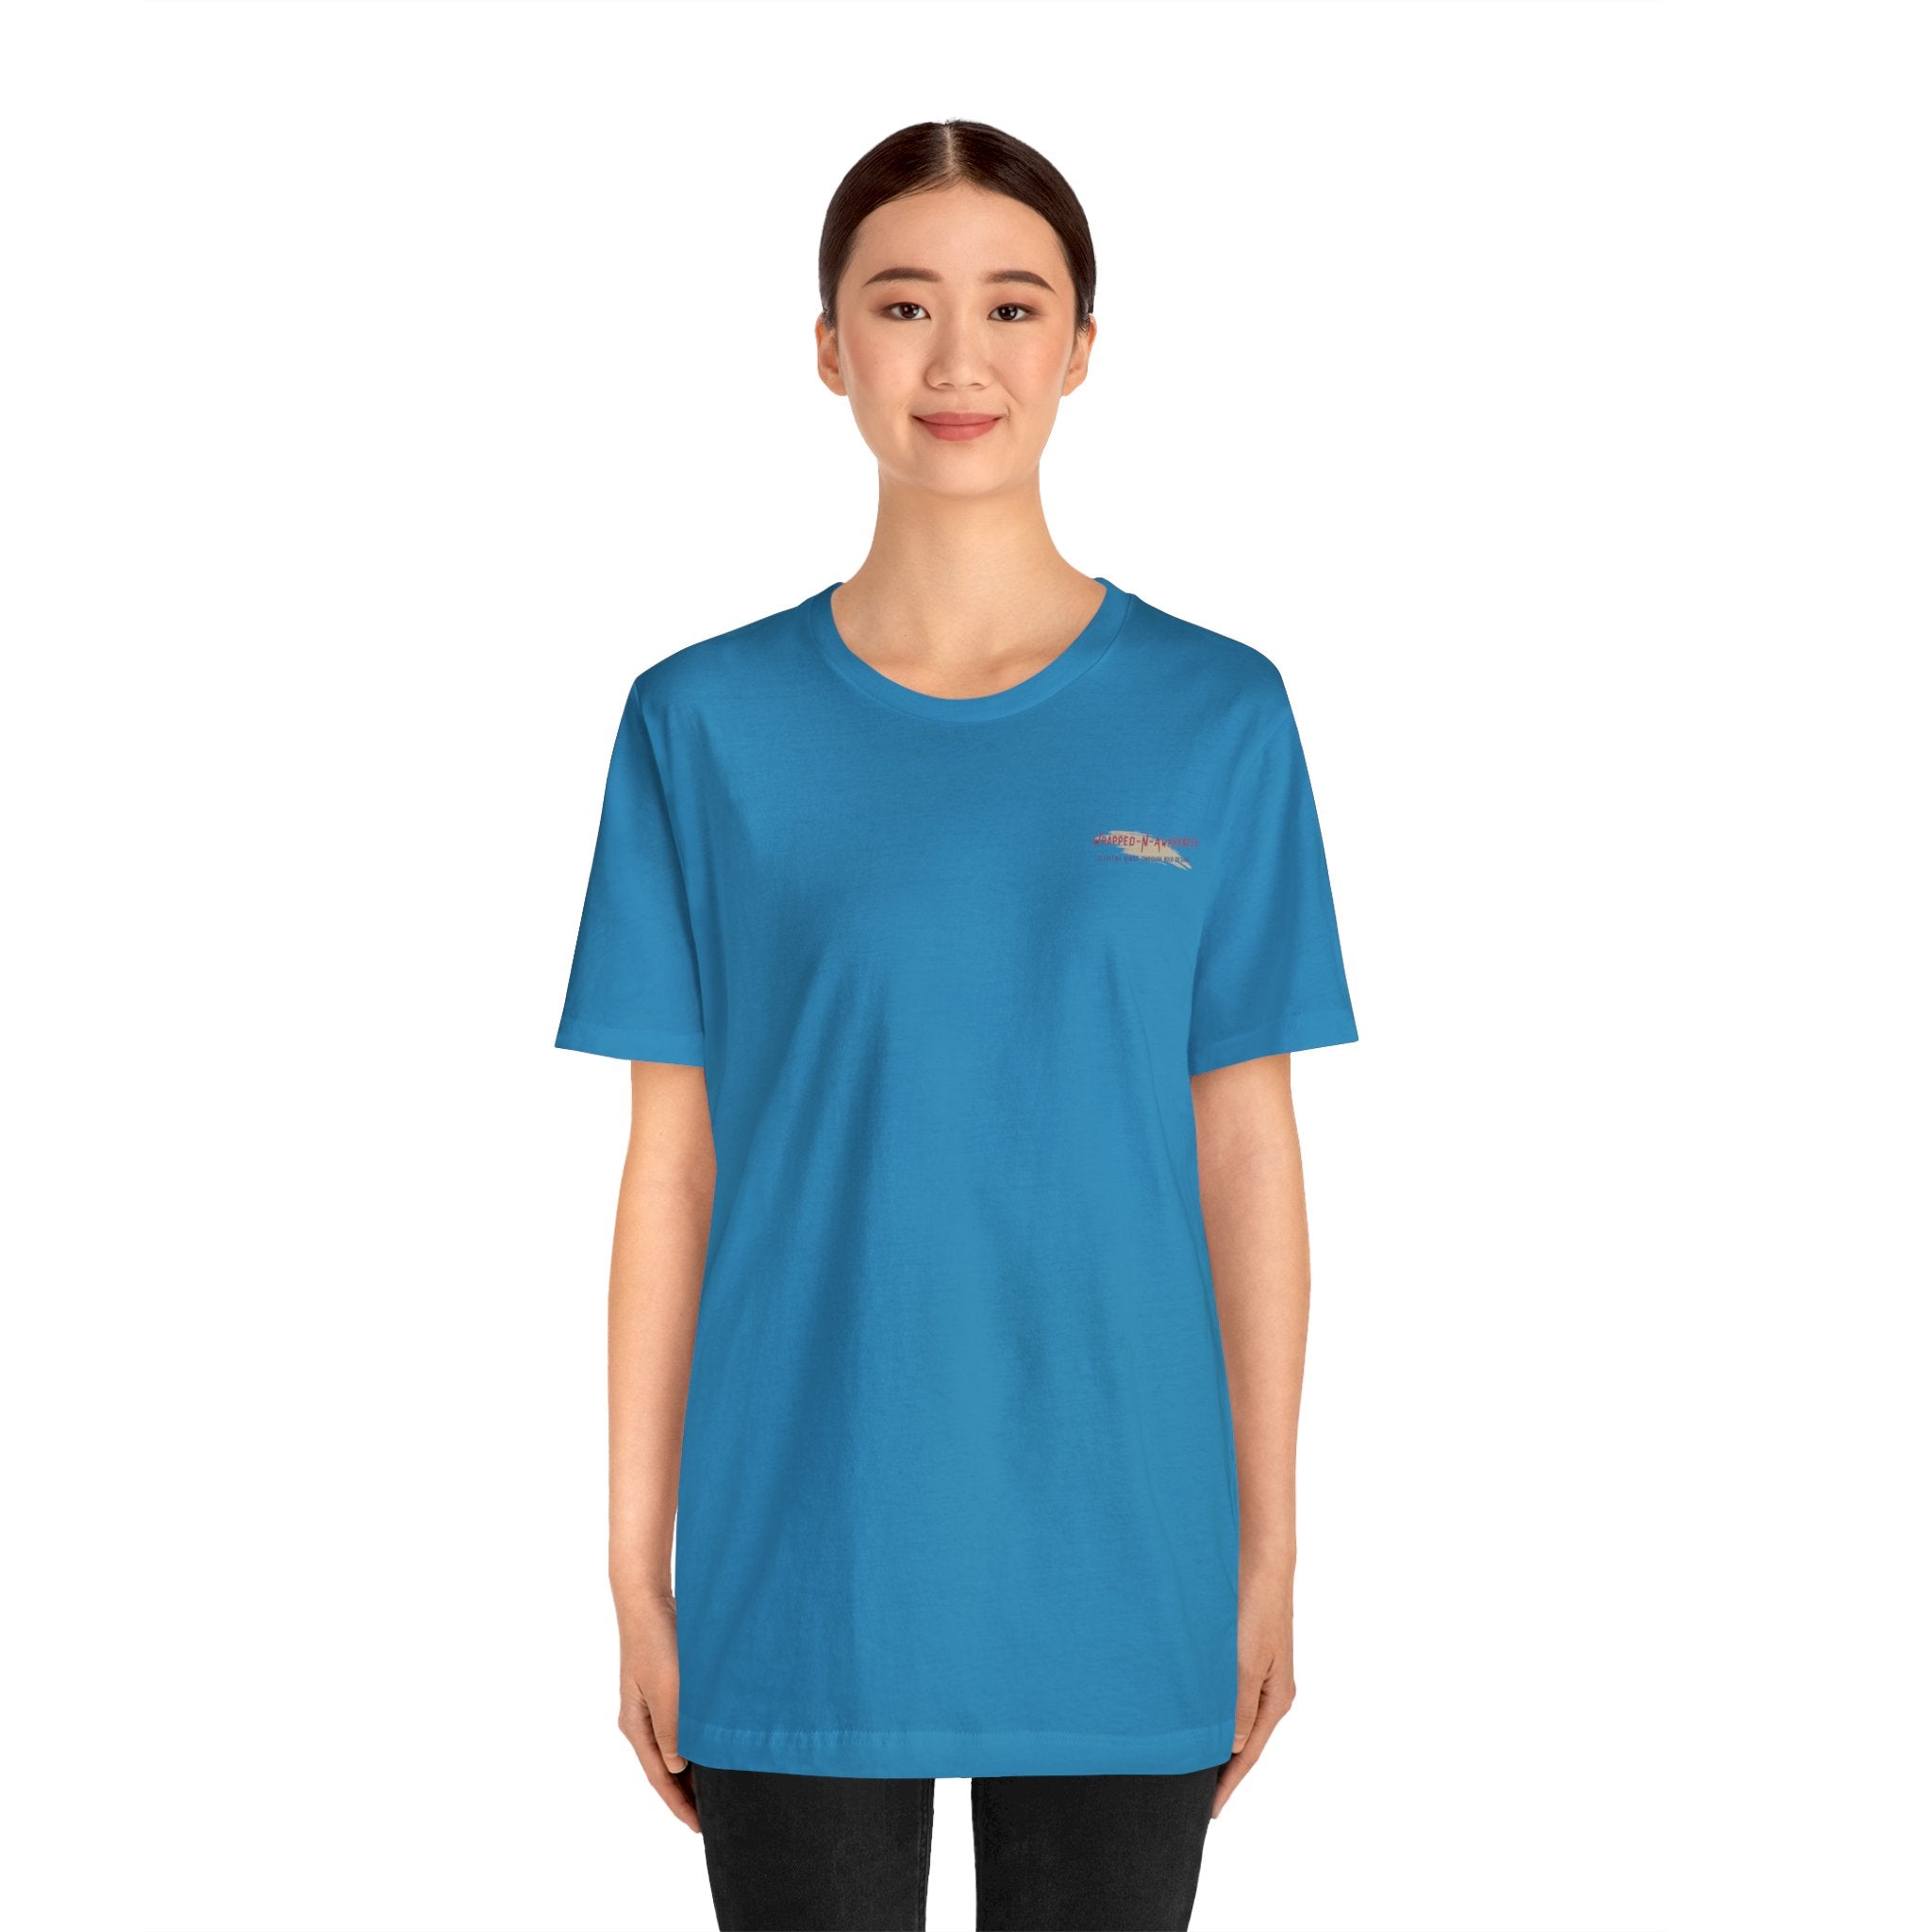 Embrace Self-Care Jersey Tee - Bella+Canvas 3001 Heather Mauve Airlume Cotton Bella+Canvas 3001 Crew Neckline Jersey Short Sleeve Lightweight Fabric Mental Health Support Retail Fit Tear-away Label Tee Unisex Tee T-Shirt 74839685062790664_2048 Printify